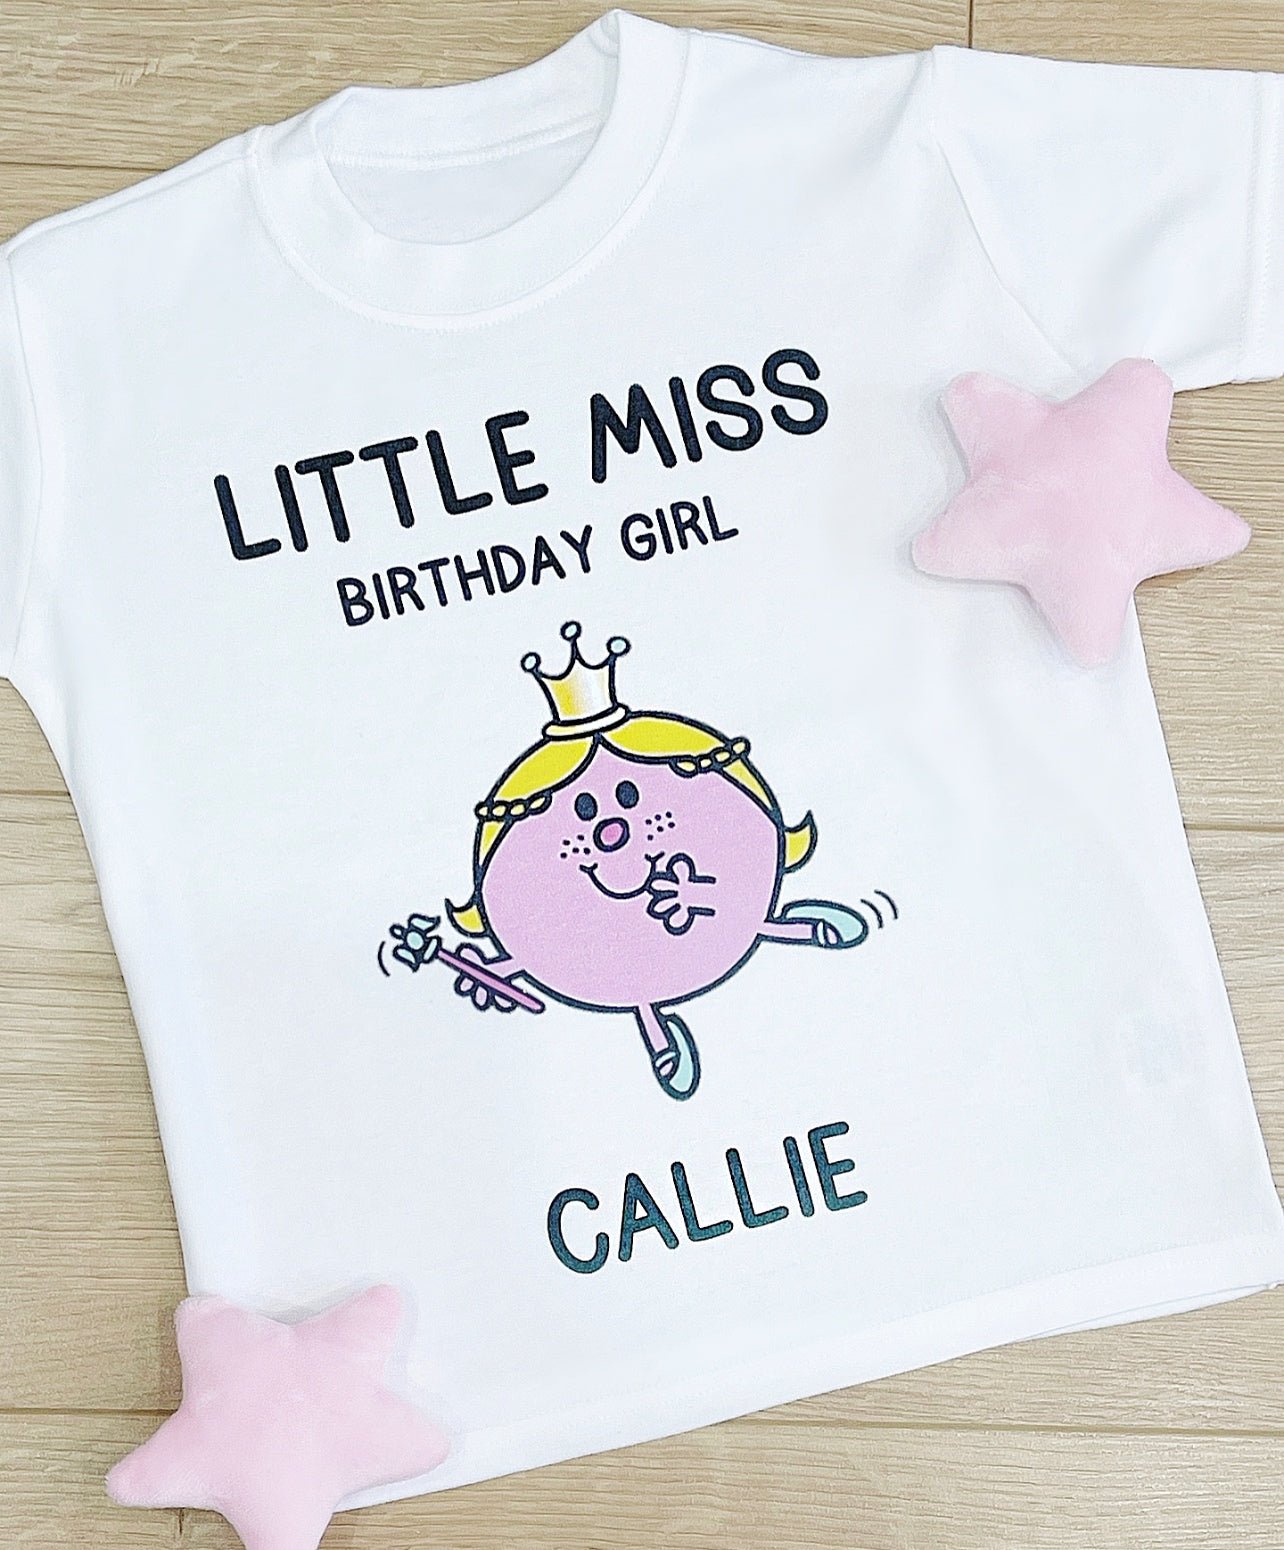 Little Miss Birthday Girl Tee - Cute as a Button by Laura